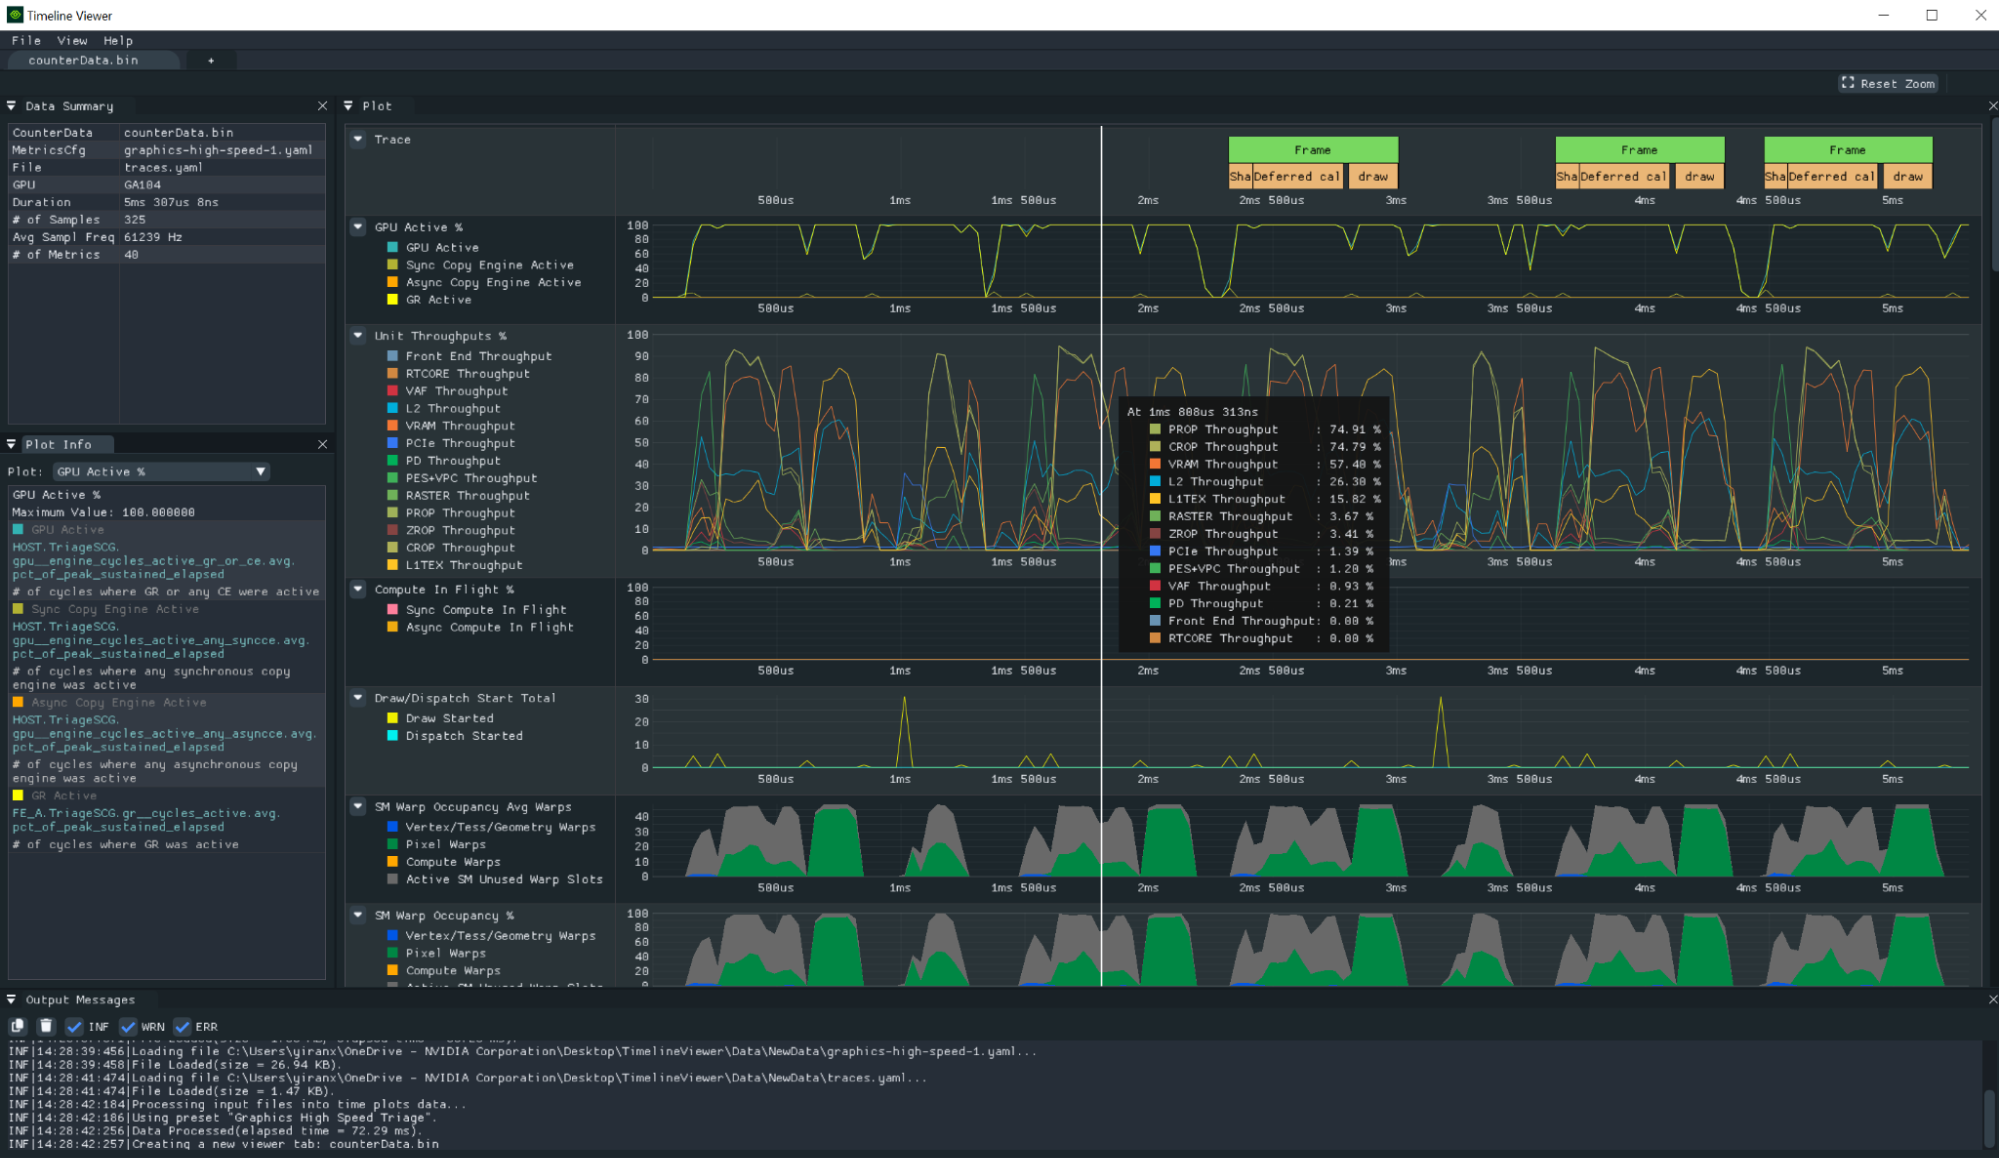 Key GPU metrics are captured in real-time and plotted on the Nsight Perf SDK timeline.